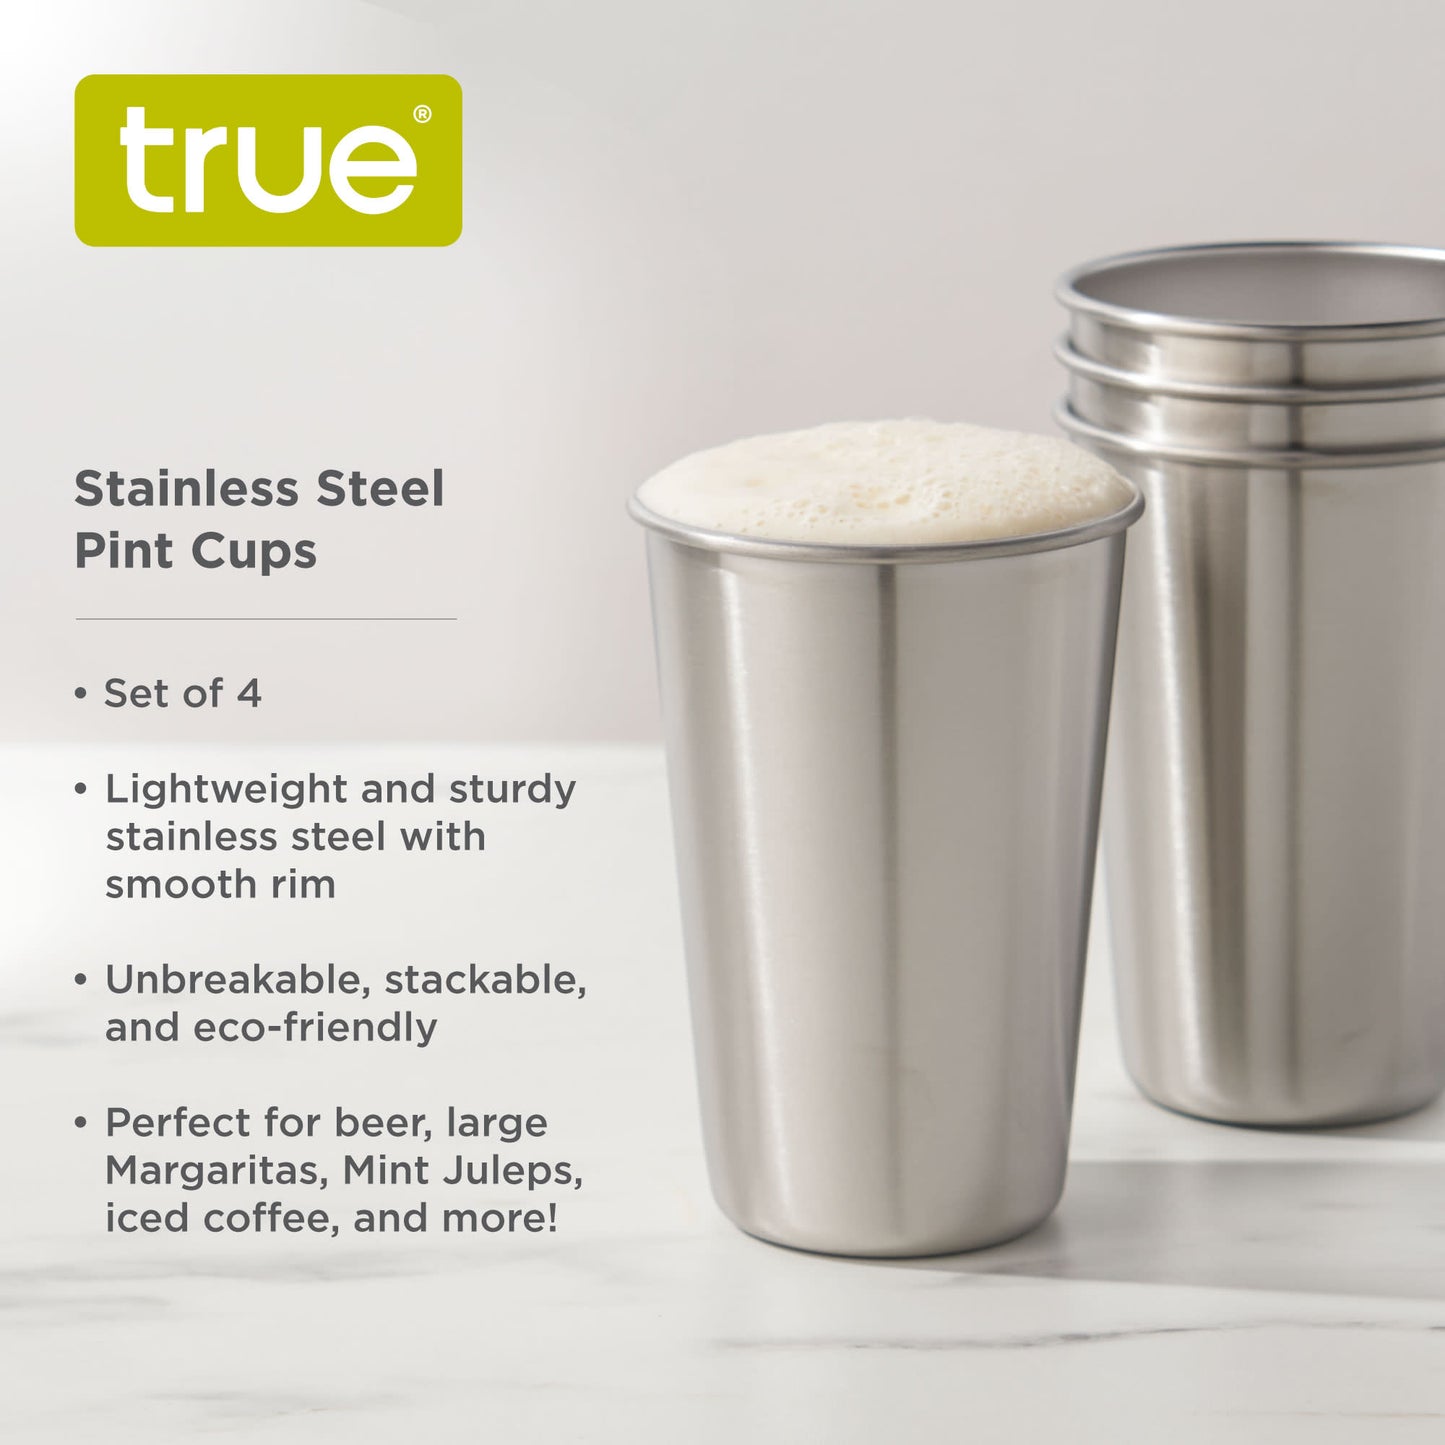 Stainless Steel Pint Cups, Set of 4